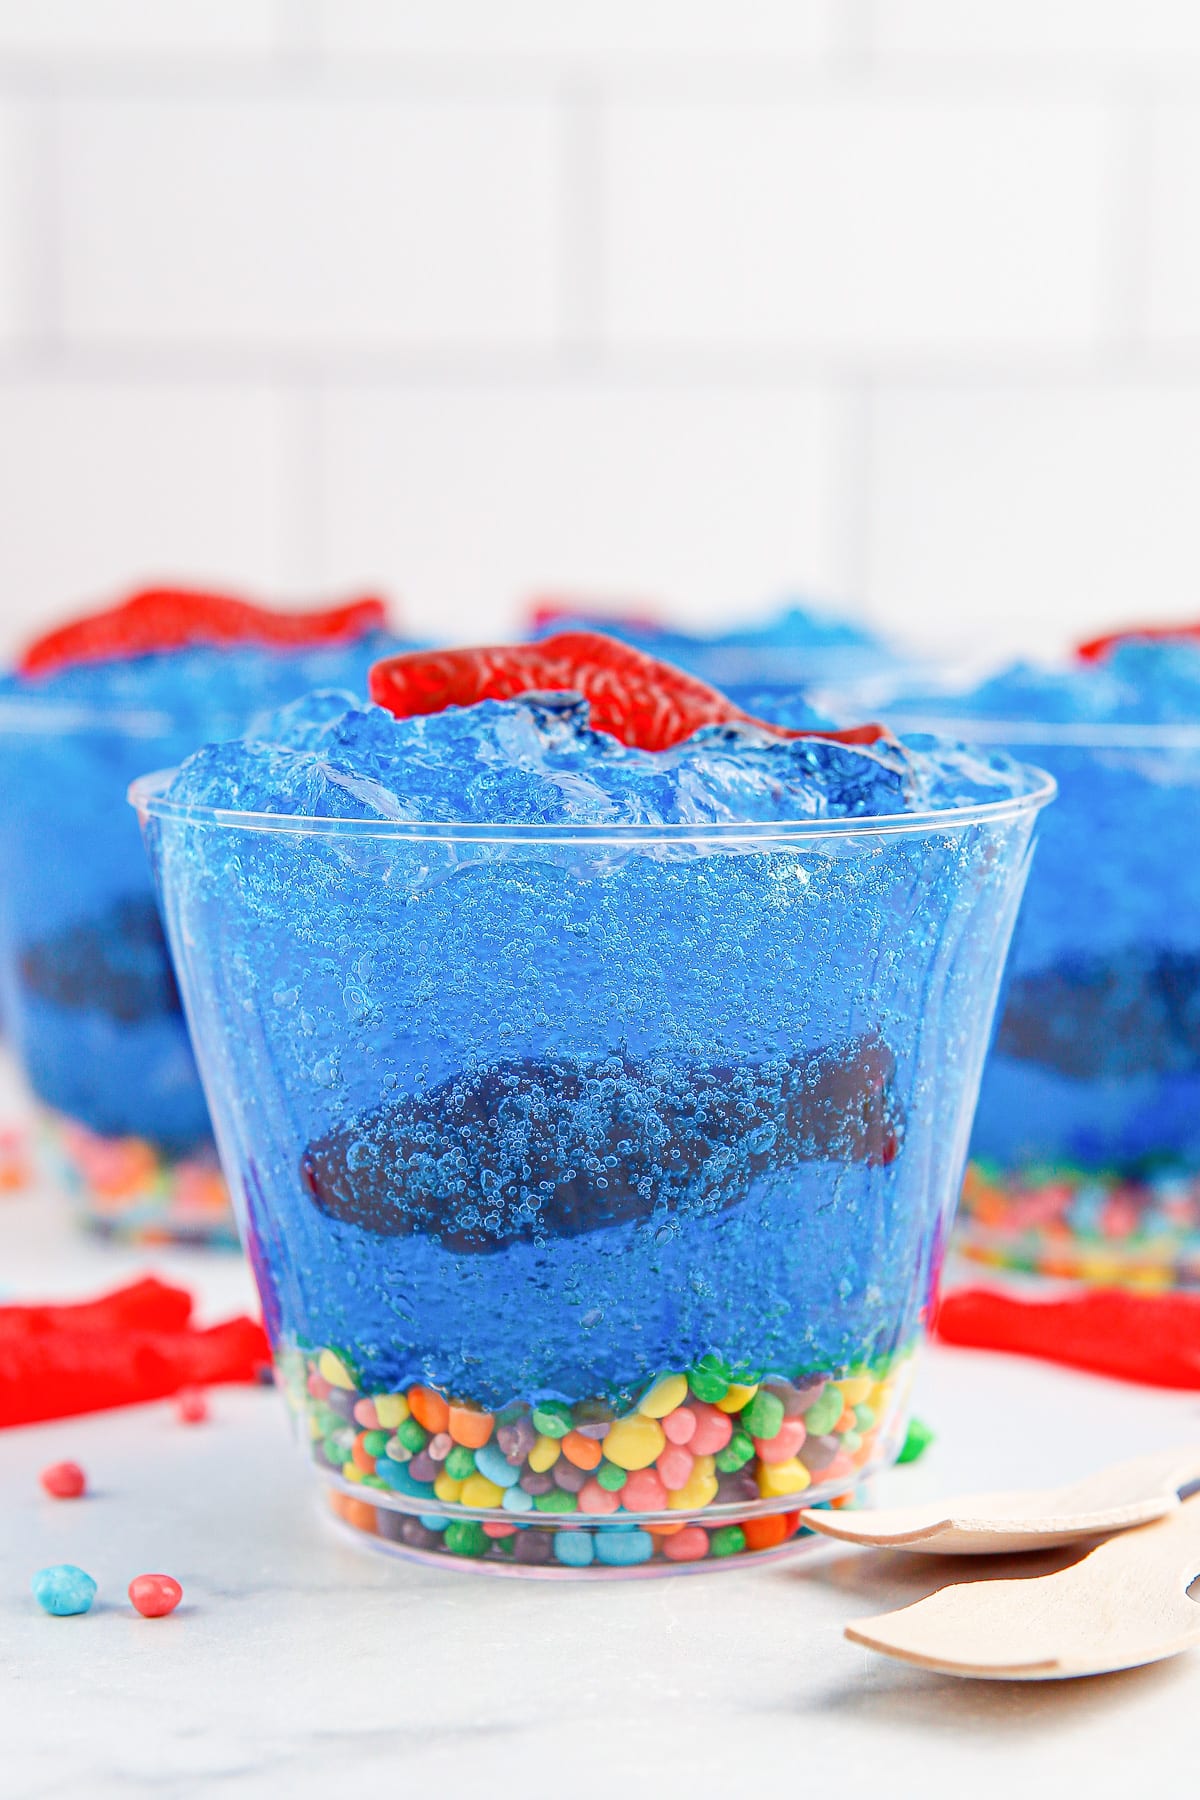 Side vie of bubbly blue gelatin with a candy fish inside and on top in a cup and colorful candy nerds on the bottom of the cup from the side.